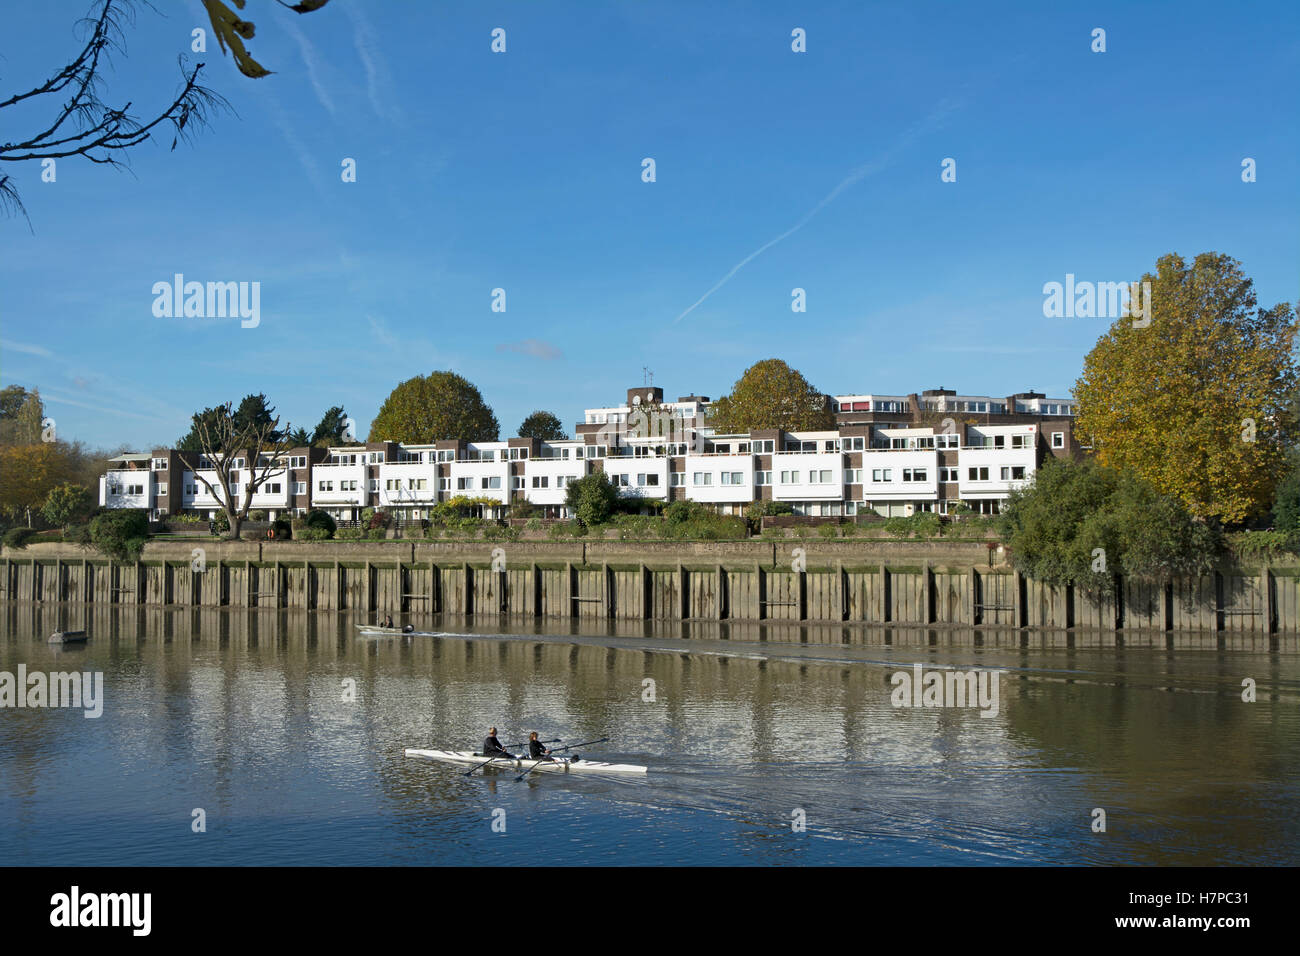 houses and apartments overlooking the river thames in brentford, west london, england, with passing canoeists Stock Photo